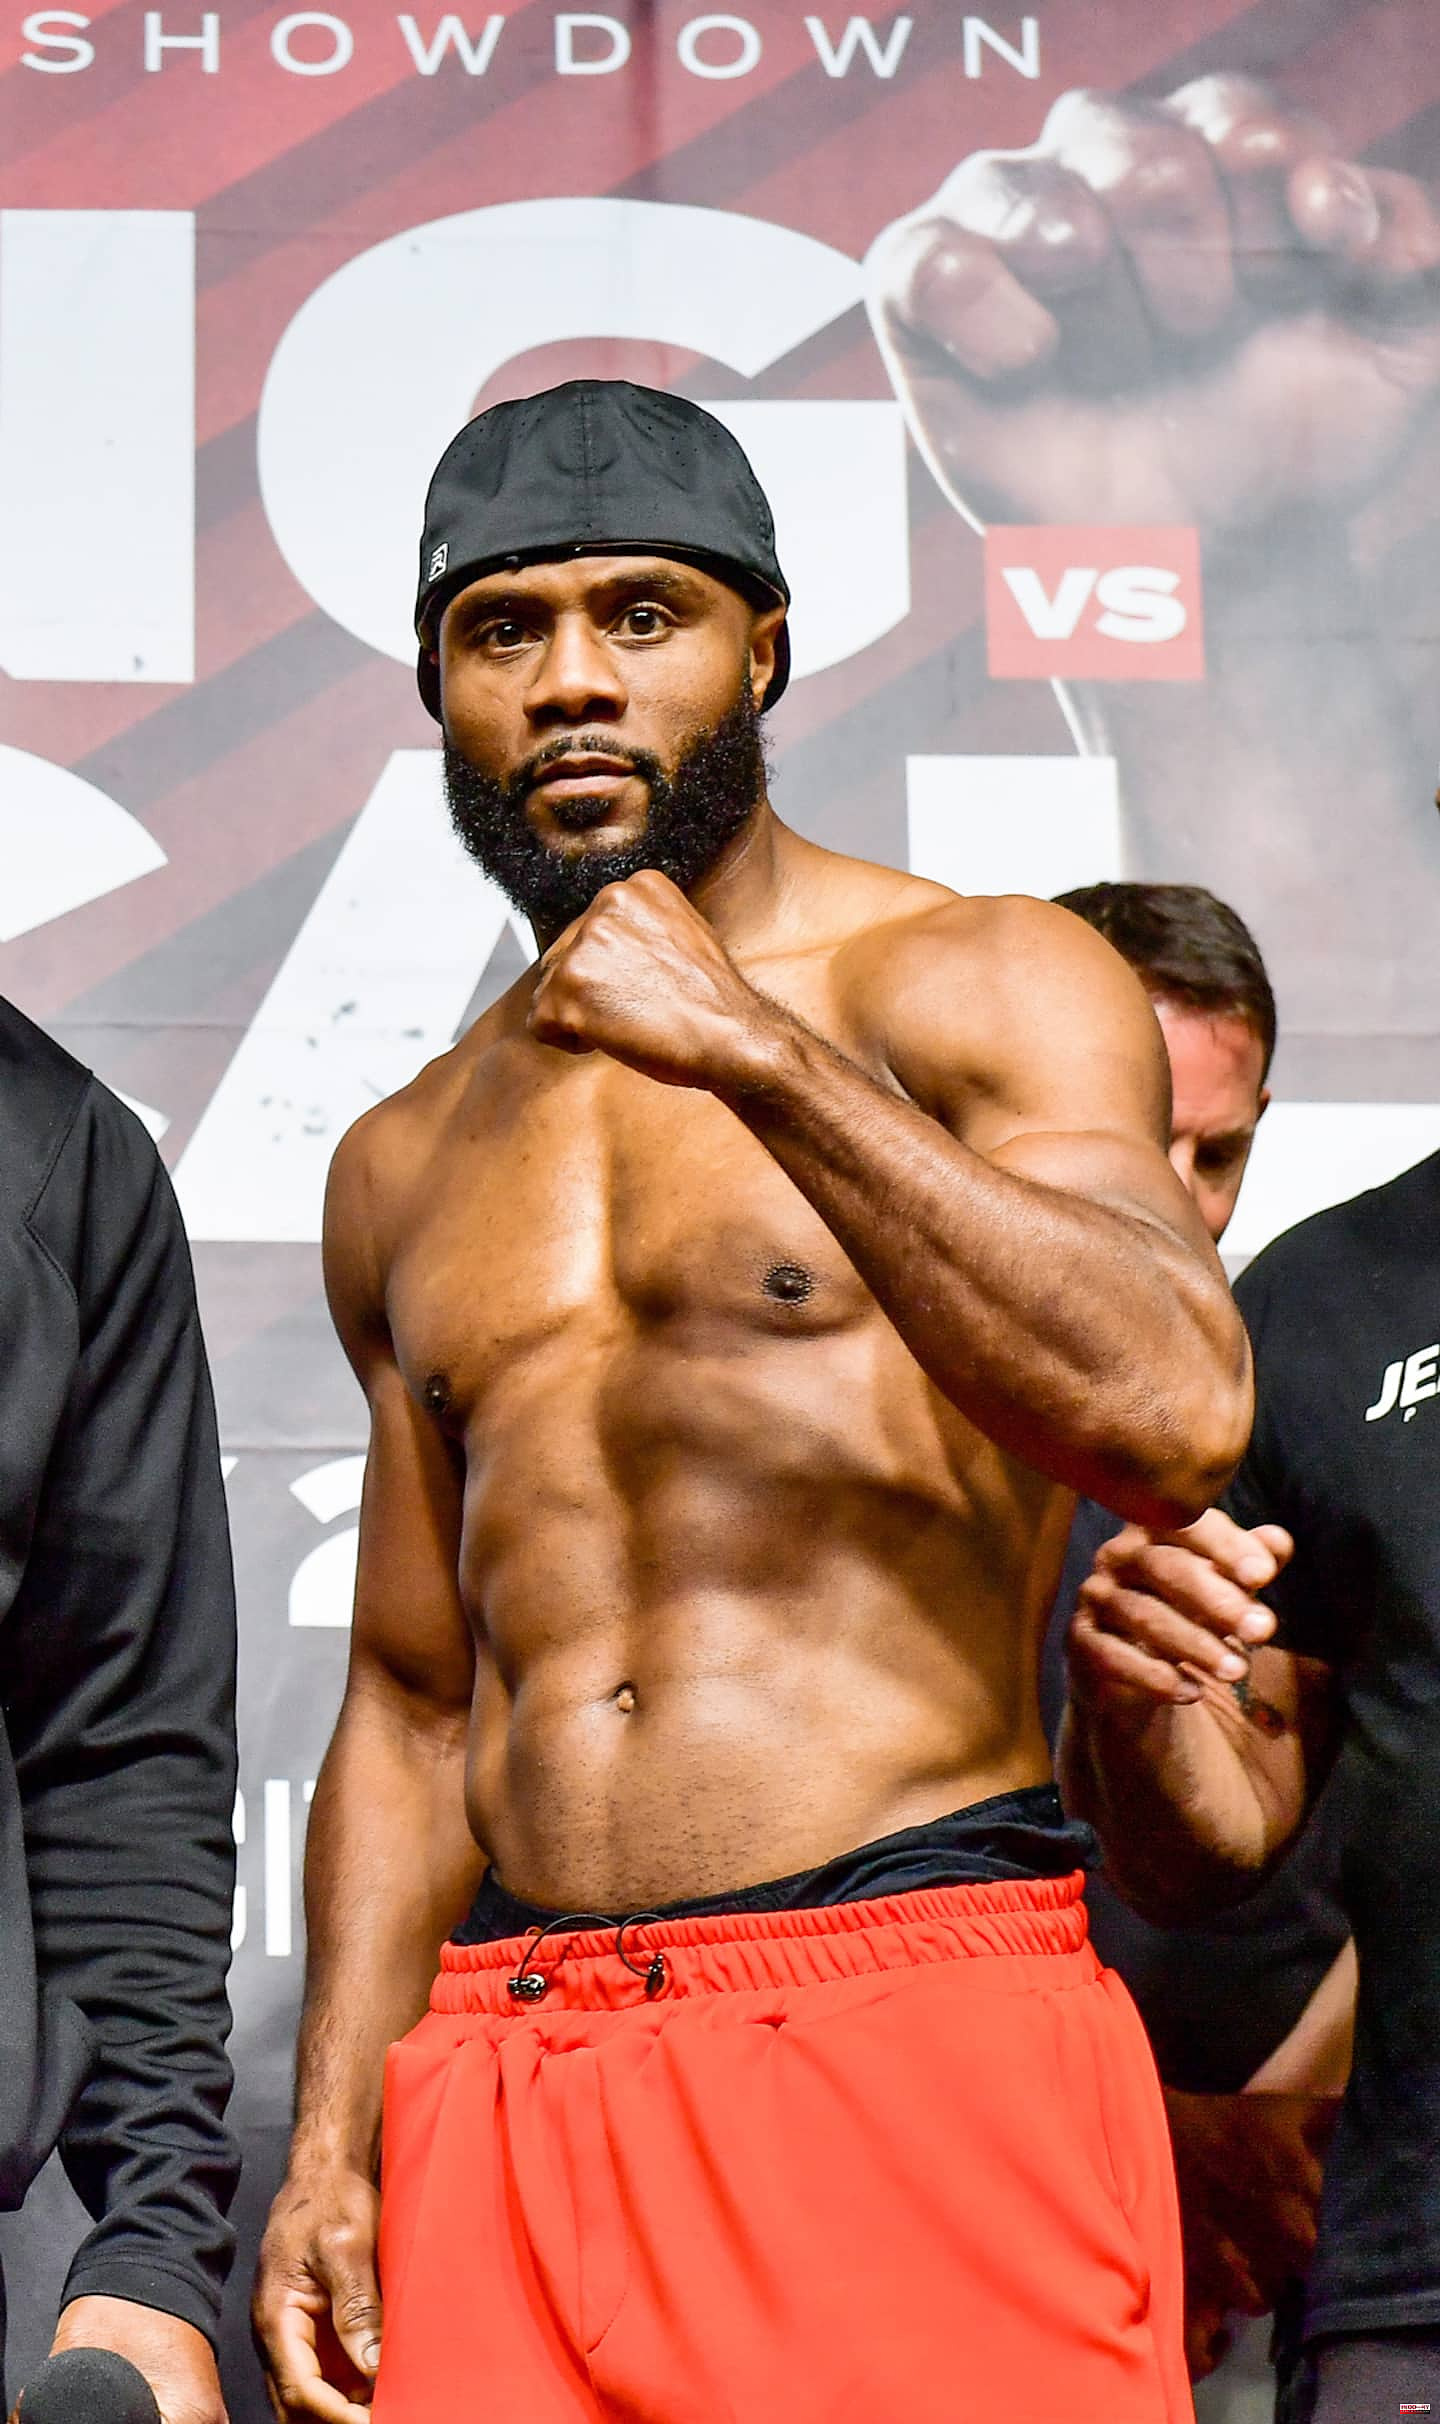 "It's not a two of spades" -Jean Pascal